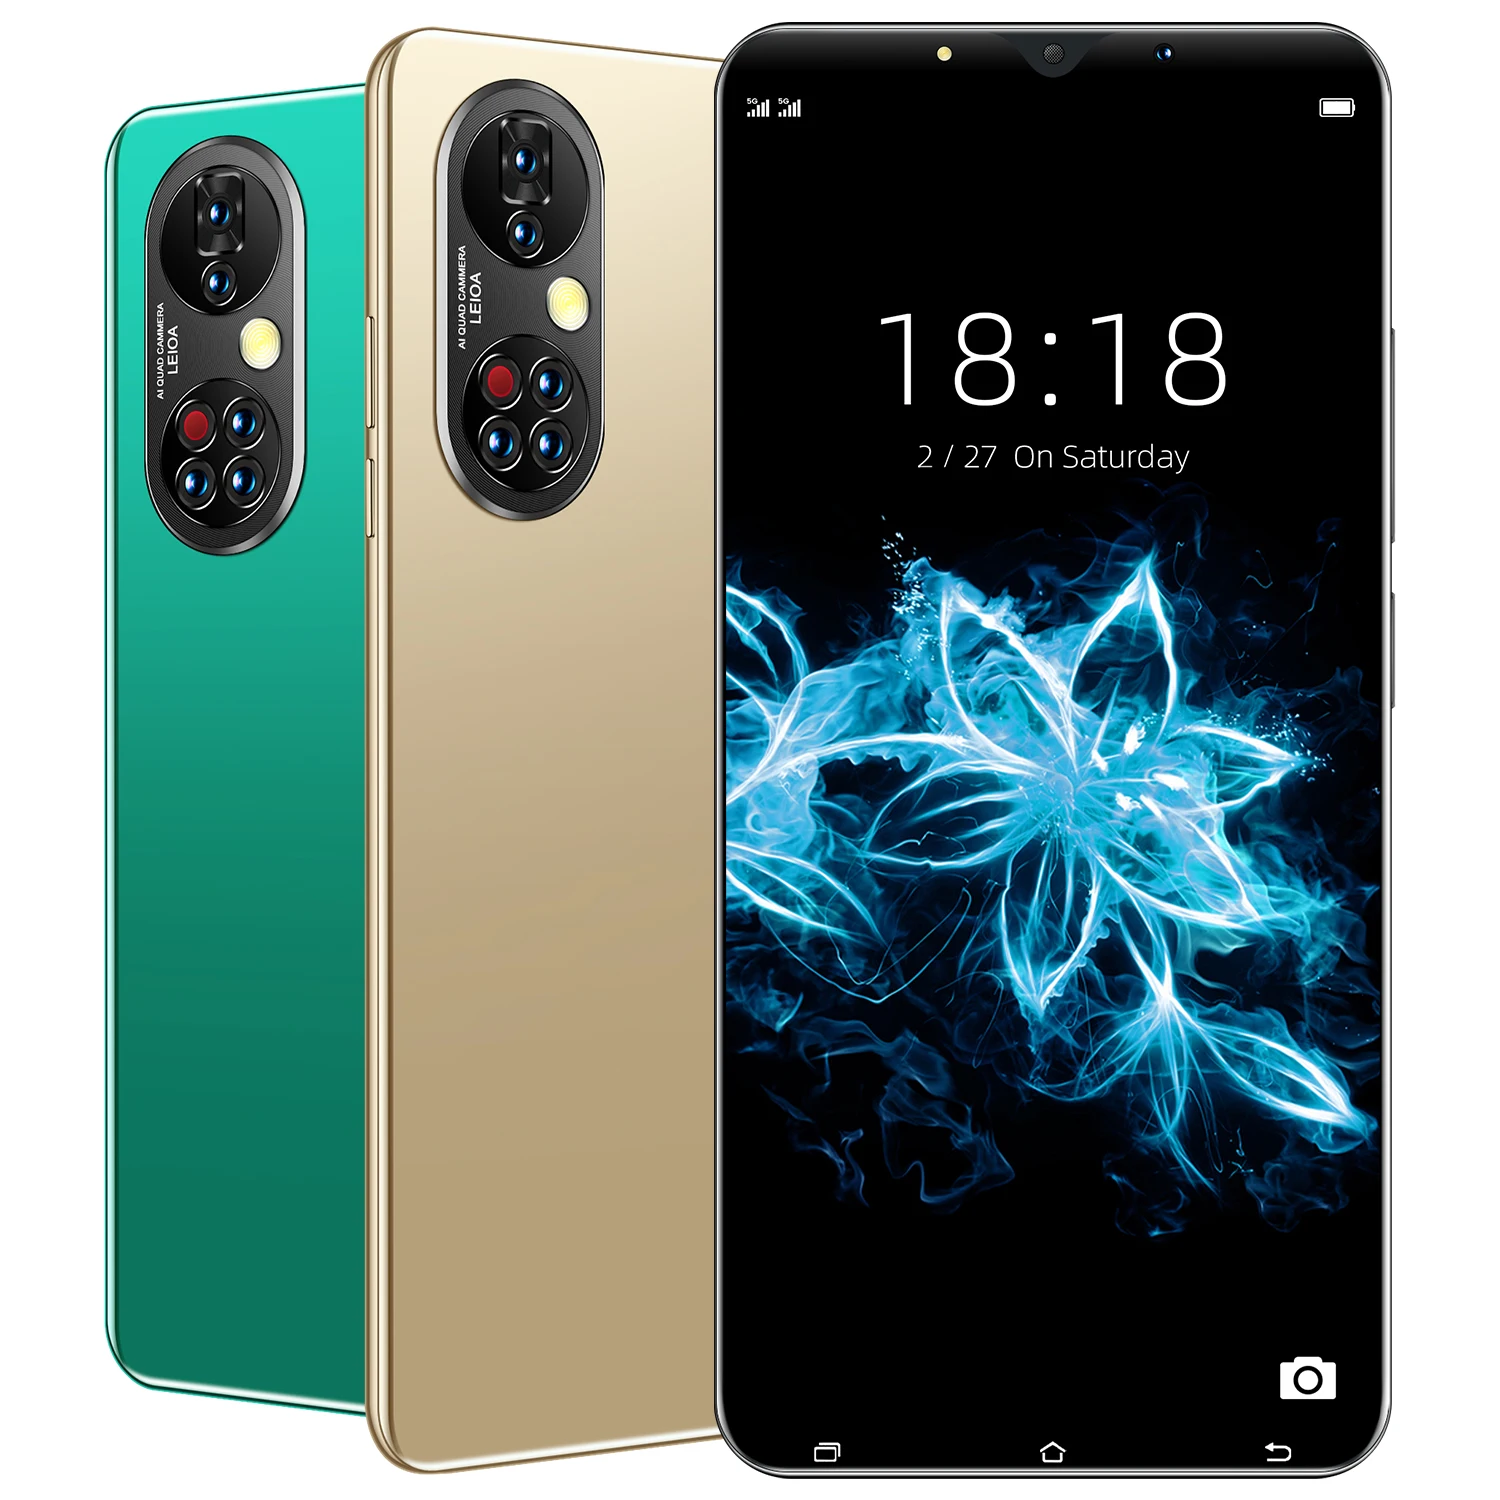 

Wholesale P50pro 4GB+64GB 5.3 inch Deca core 5G Android 11 mobile phone, Black/ green/gold